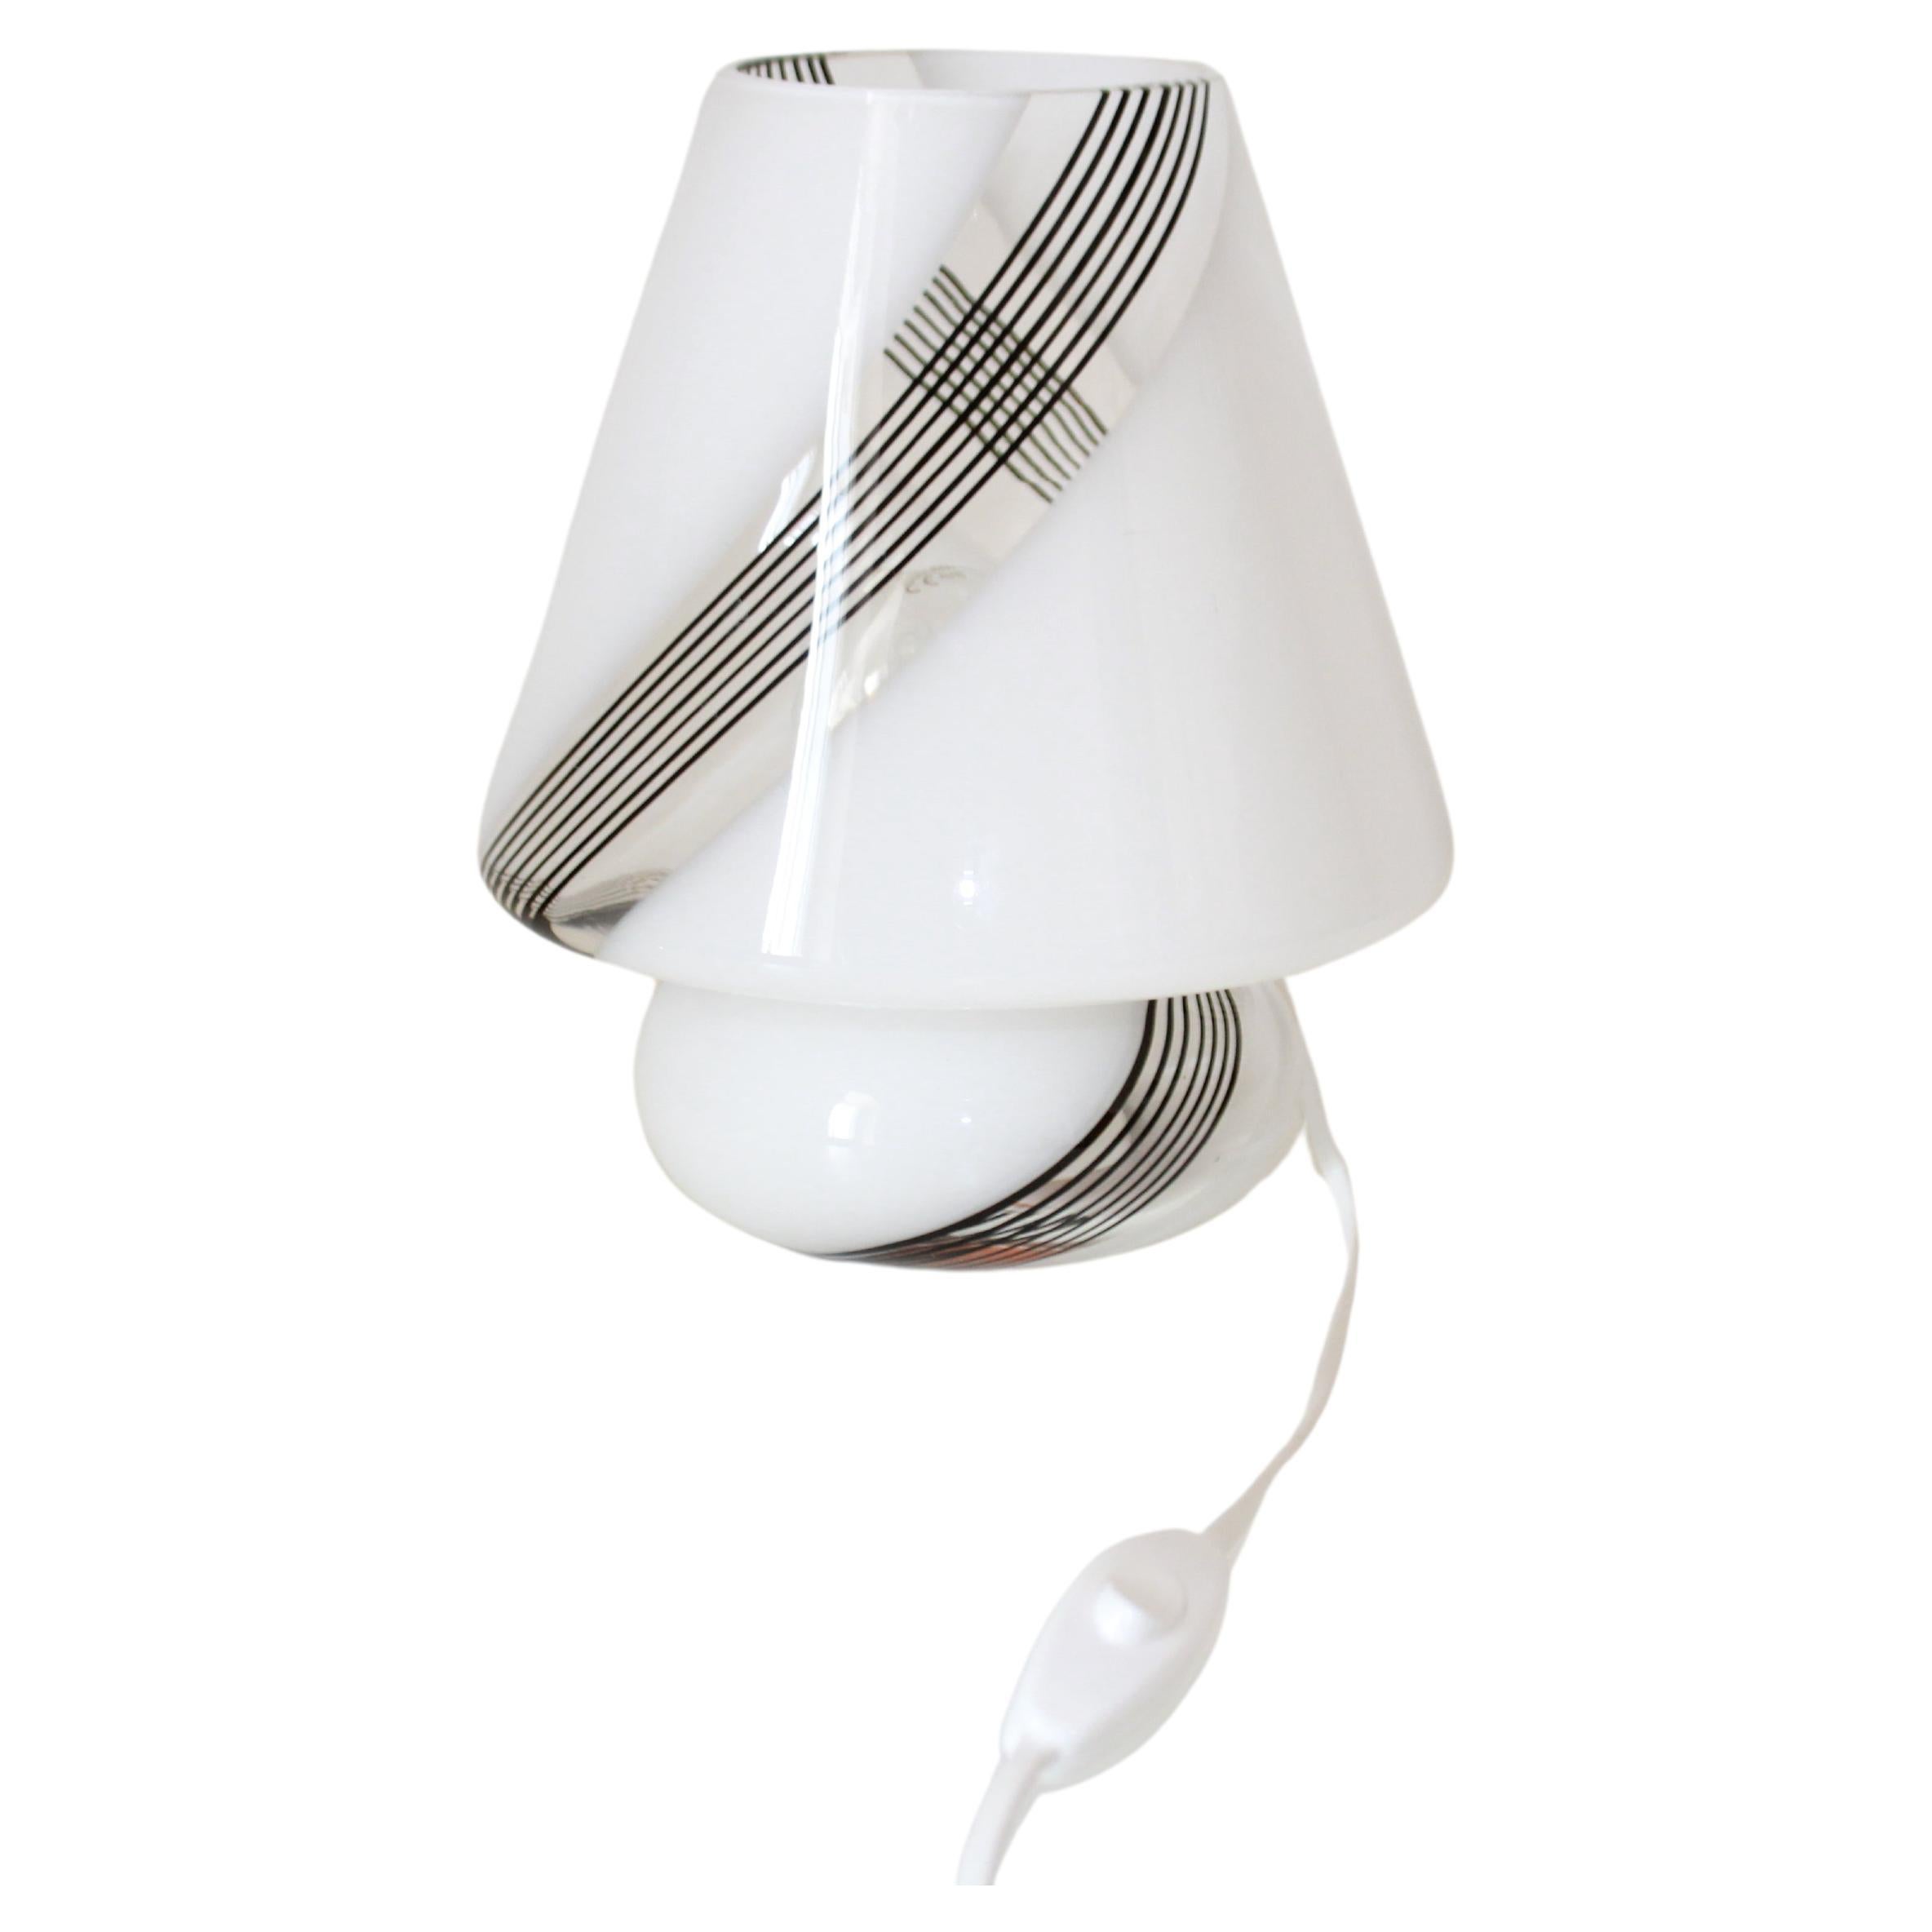 Vintage Murano Table Lamp, Italy 1960s
A really cosy late 1960' s vintage Murano glass table lamp. The lamp is characterized by beautiful and really unsual striated black and white glass pattern. In its distinctiveness, a typical piece of italian